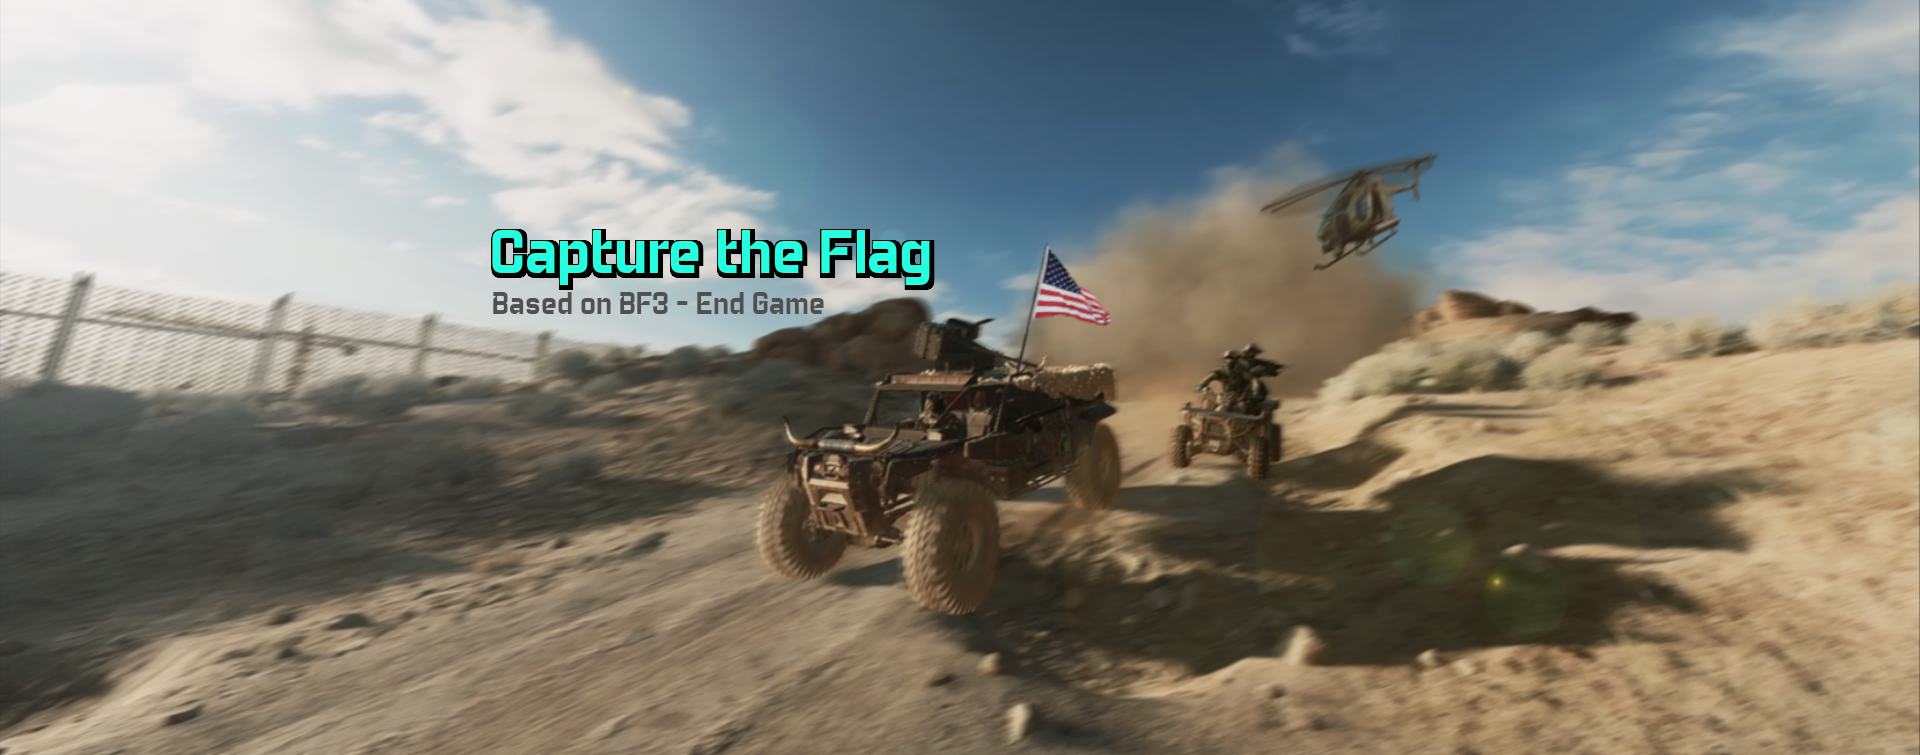 capture-the-flag-based-on-bf3